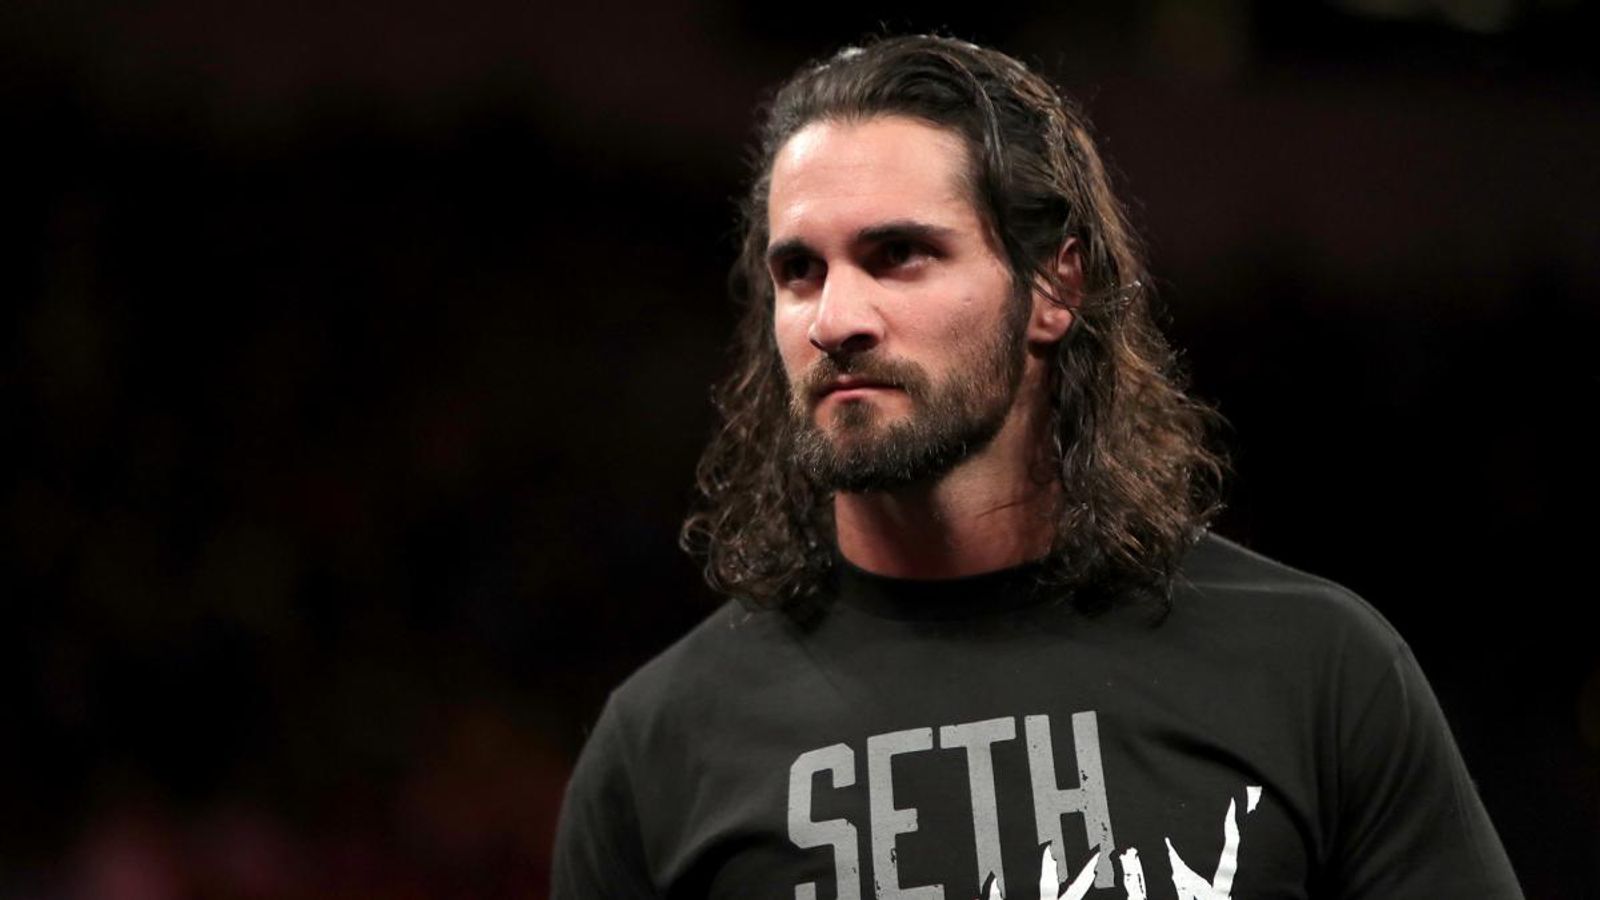 Seth Rollins has confirmed that he will be at WrestleMania 33 as he looks t...